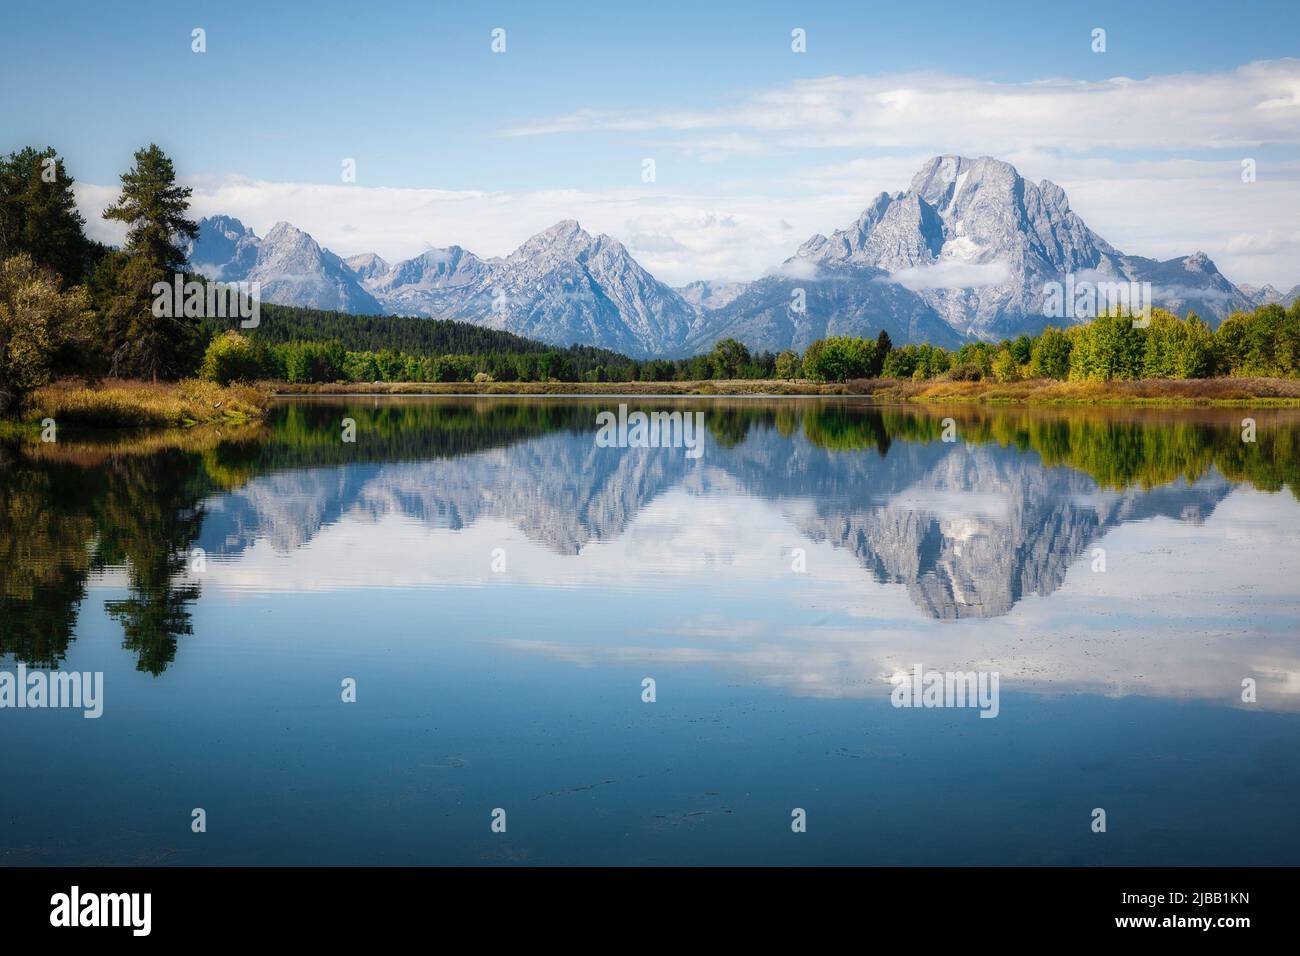 Mount Moran reflects in the still waters of the Snake River at Oxbow Bend in Wyoming. Stock Photo